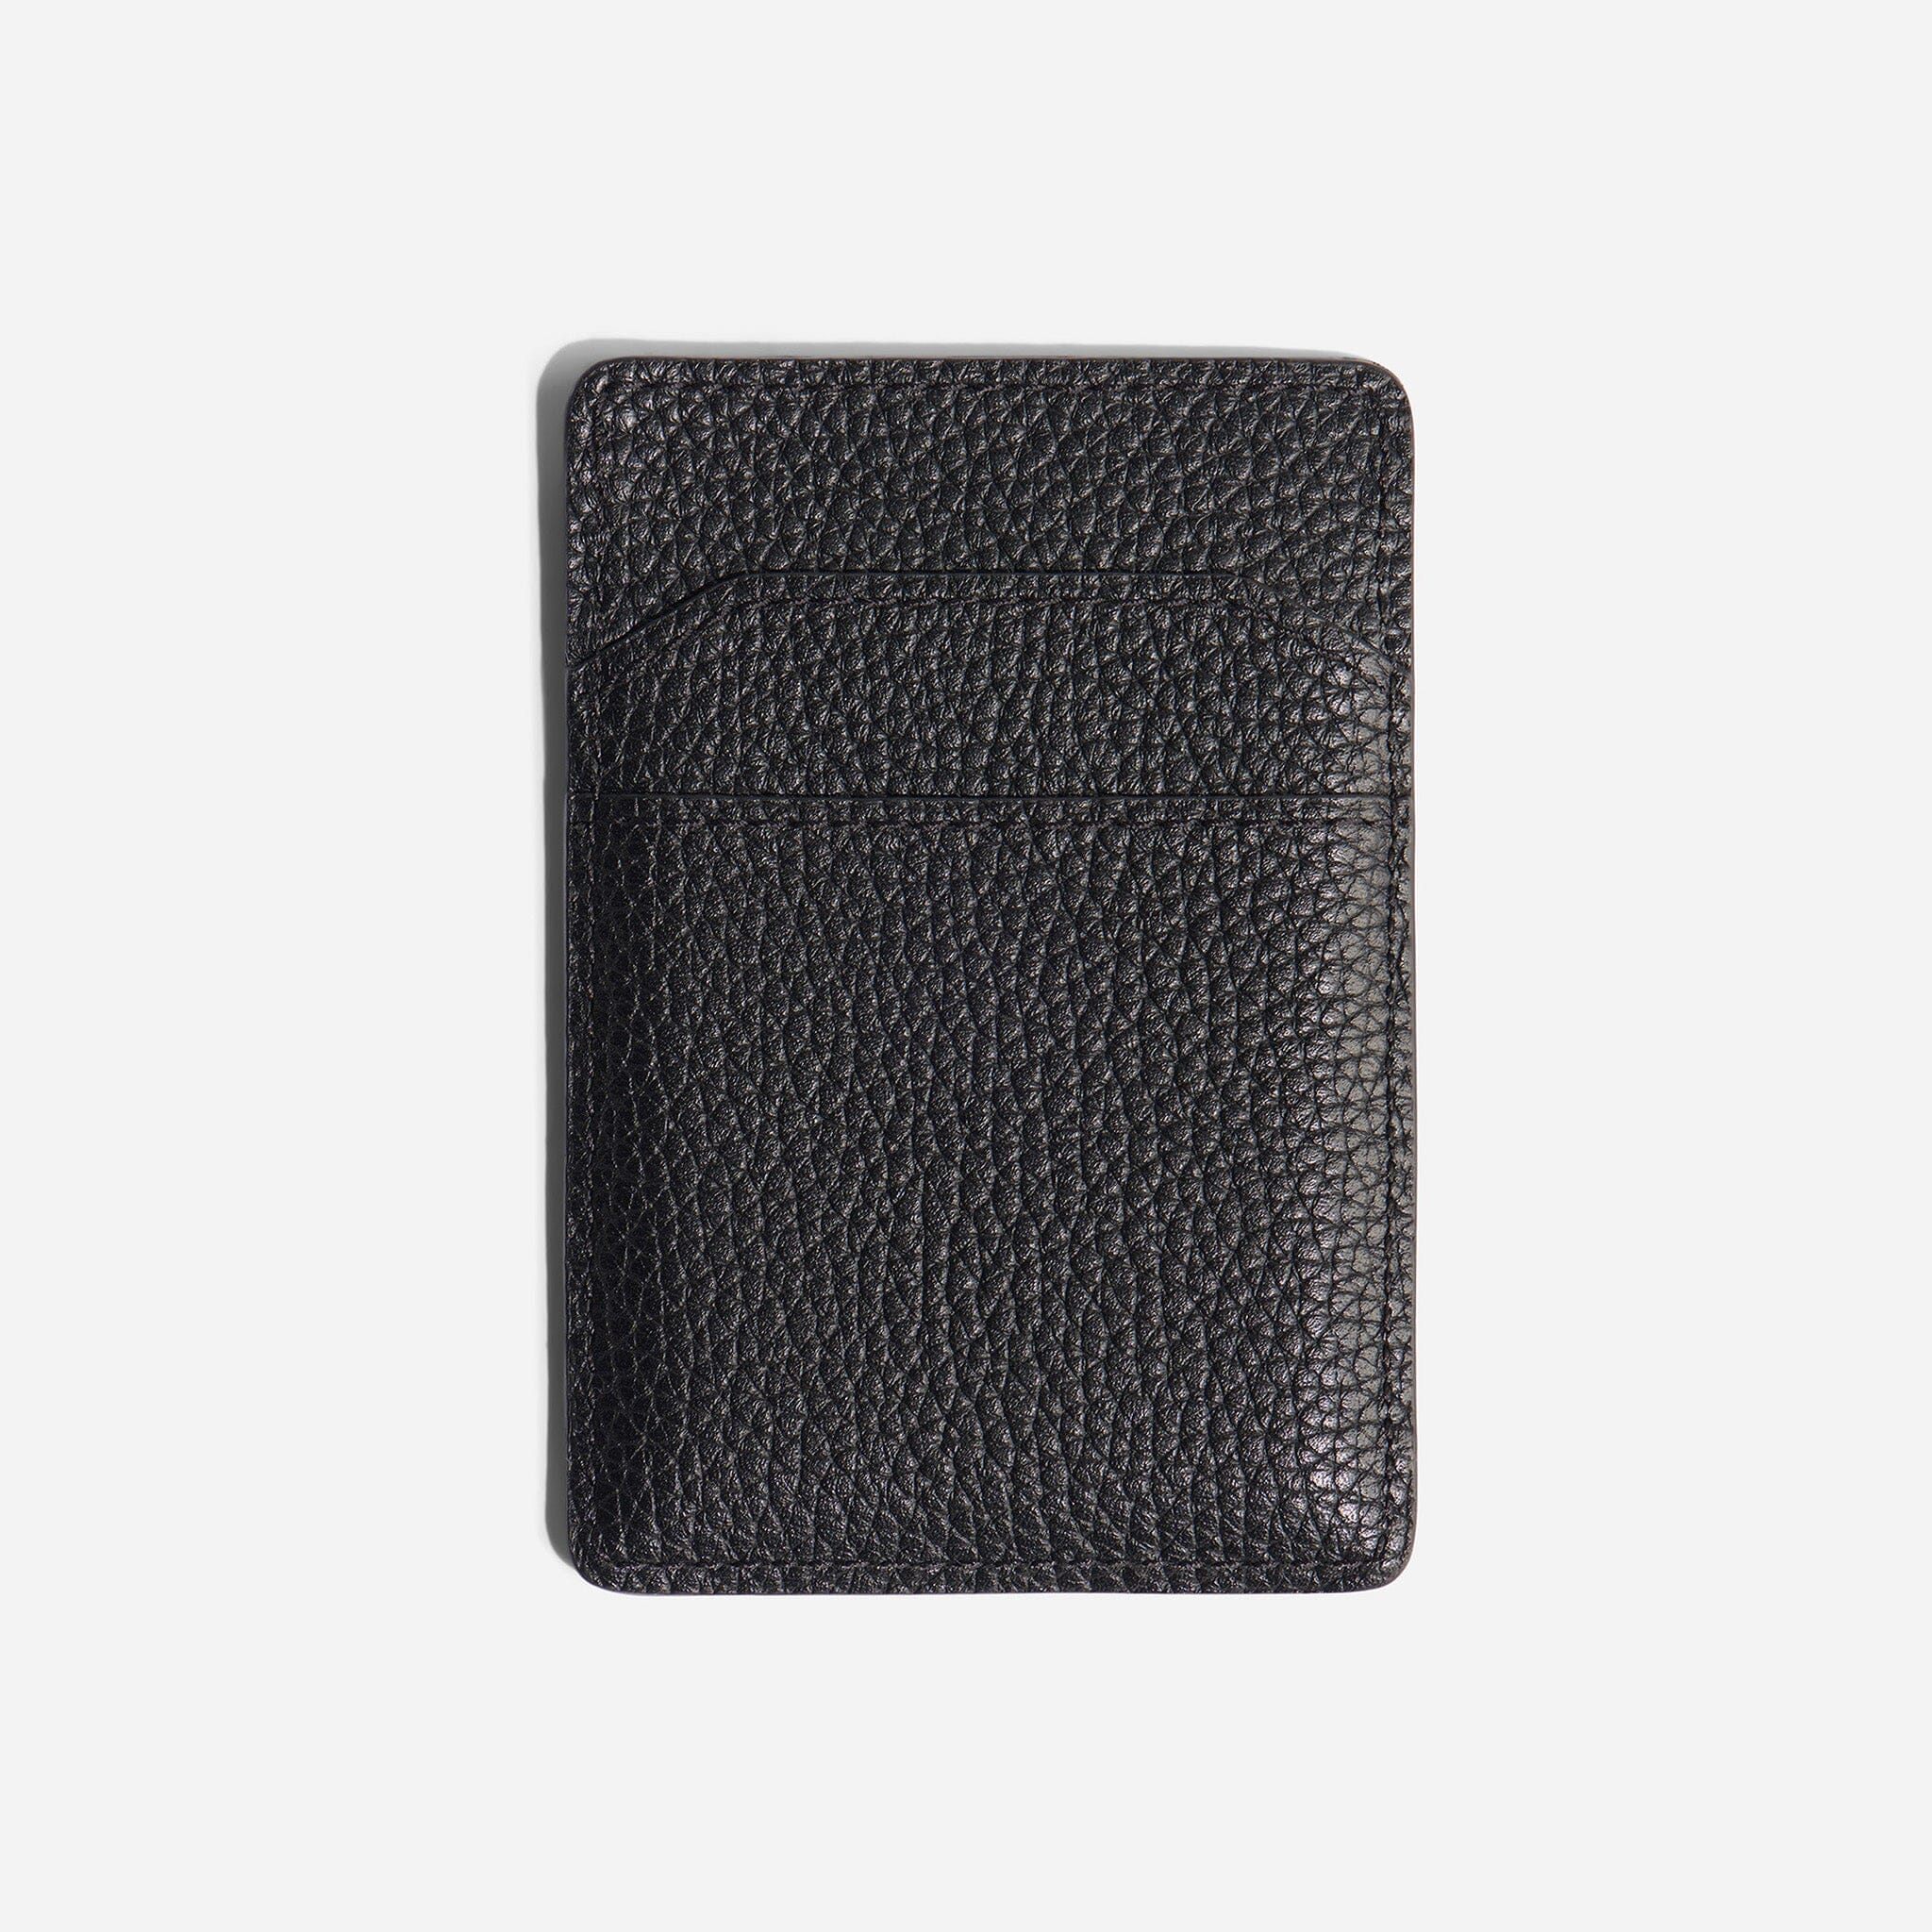 Nico Card Case Wallet Black Leather Card Case Nisolo 